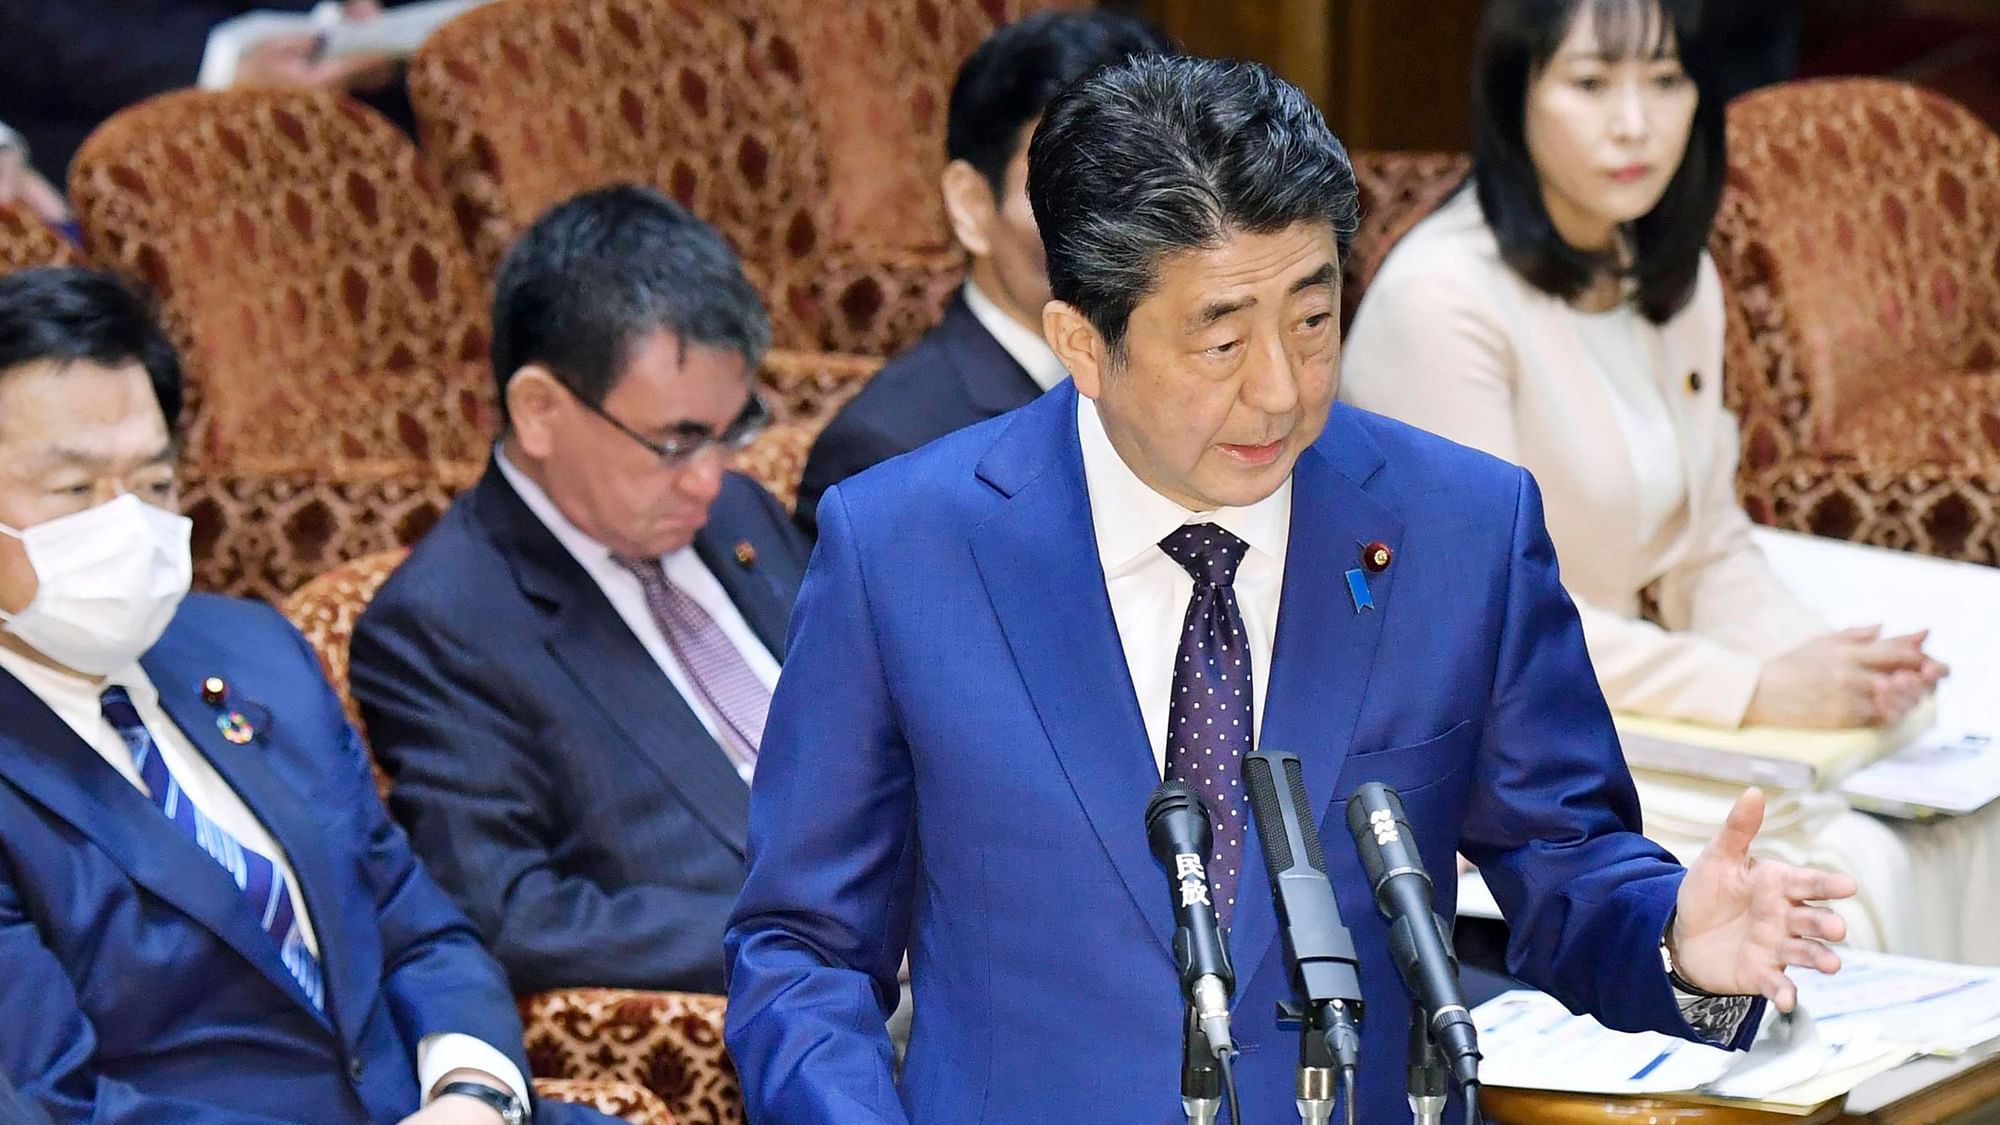 Japan’s Prime Minister Shinzo Abe speaks at a parliamentary session in Tokyo Monday, March 23, 2020. Abe said a postponement of Tokyo Olympics would be unavoidable if the games cannot be held in a complete way because of the coronavirus pandemic.&nbsp;